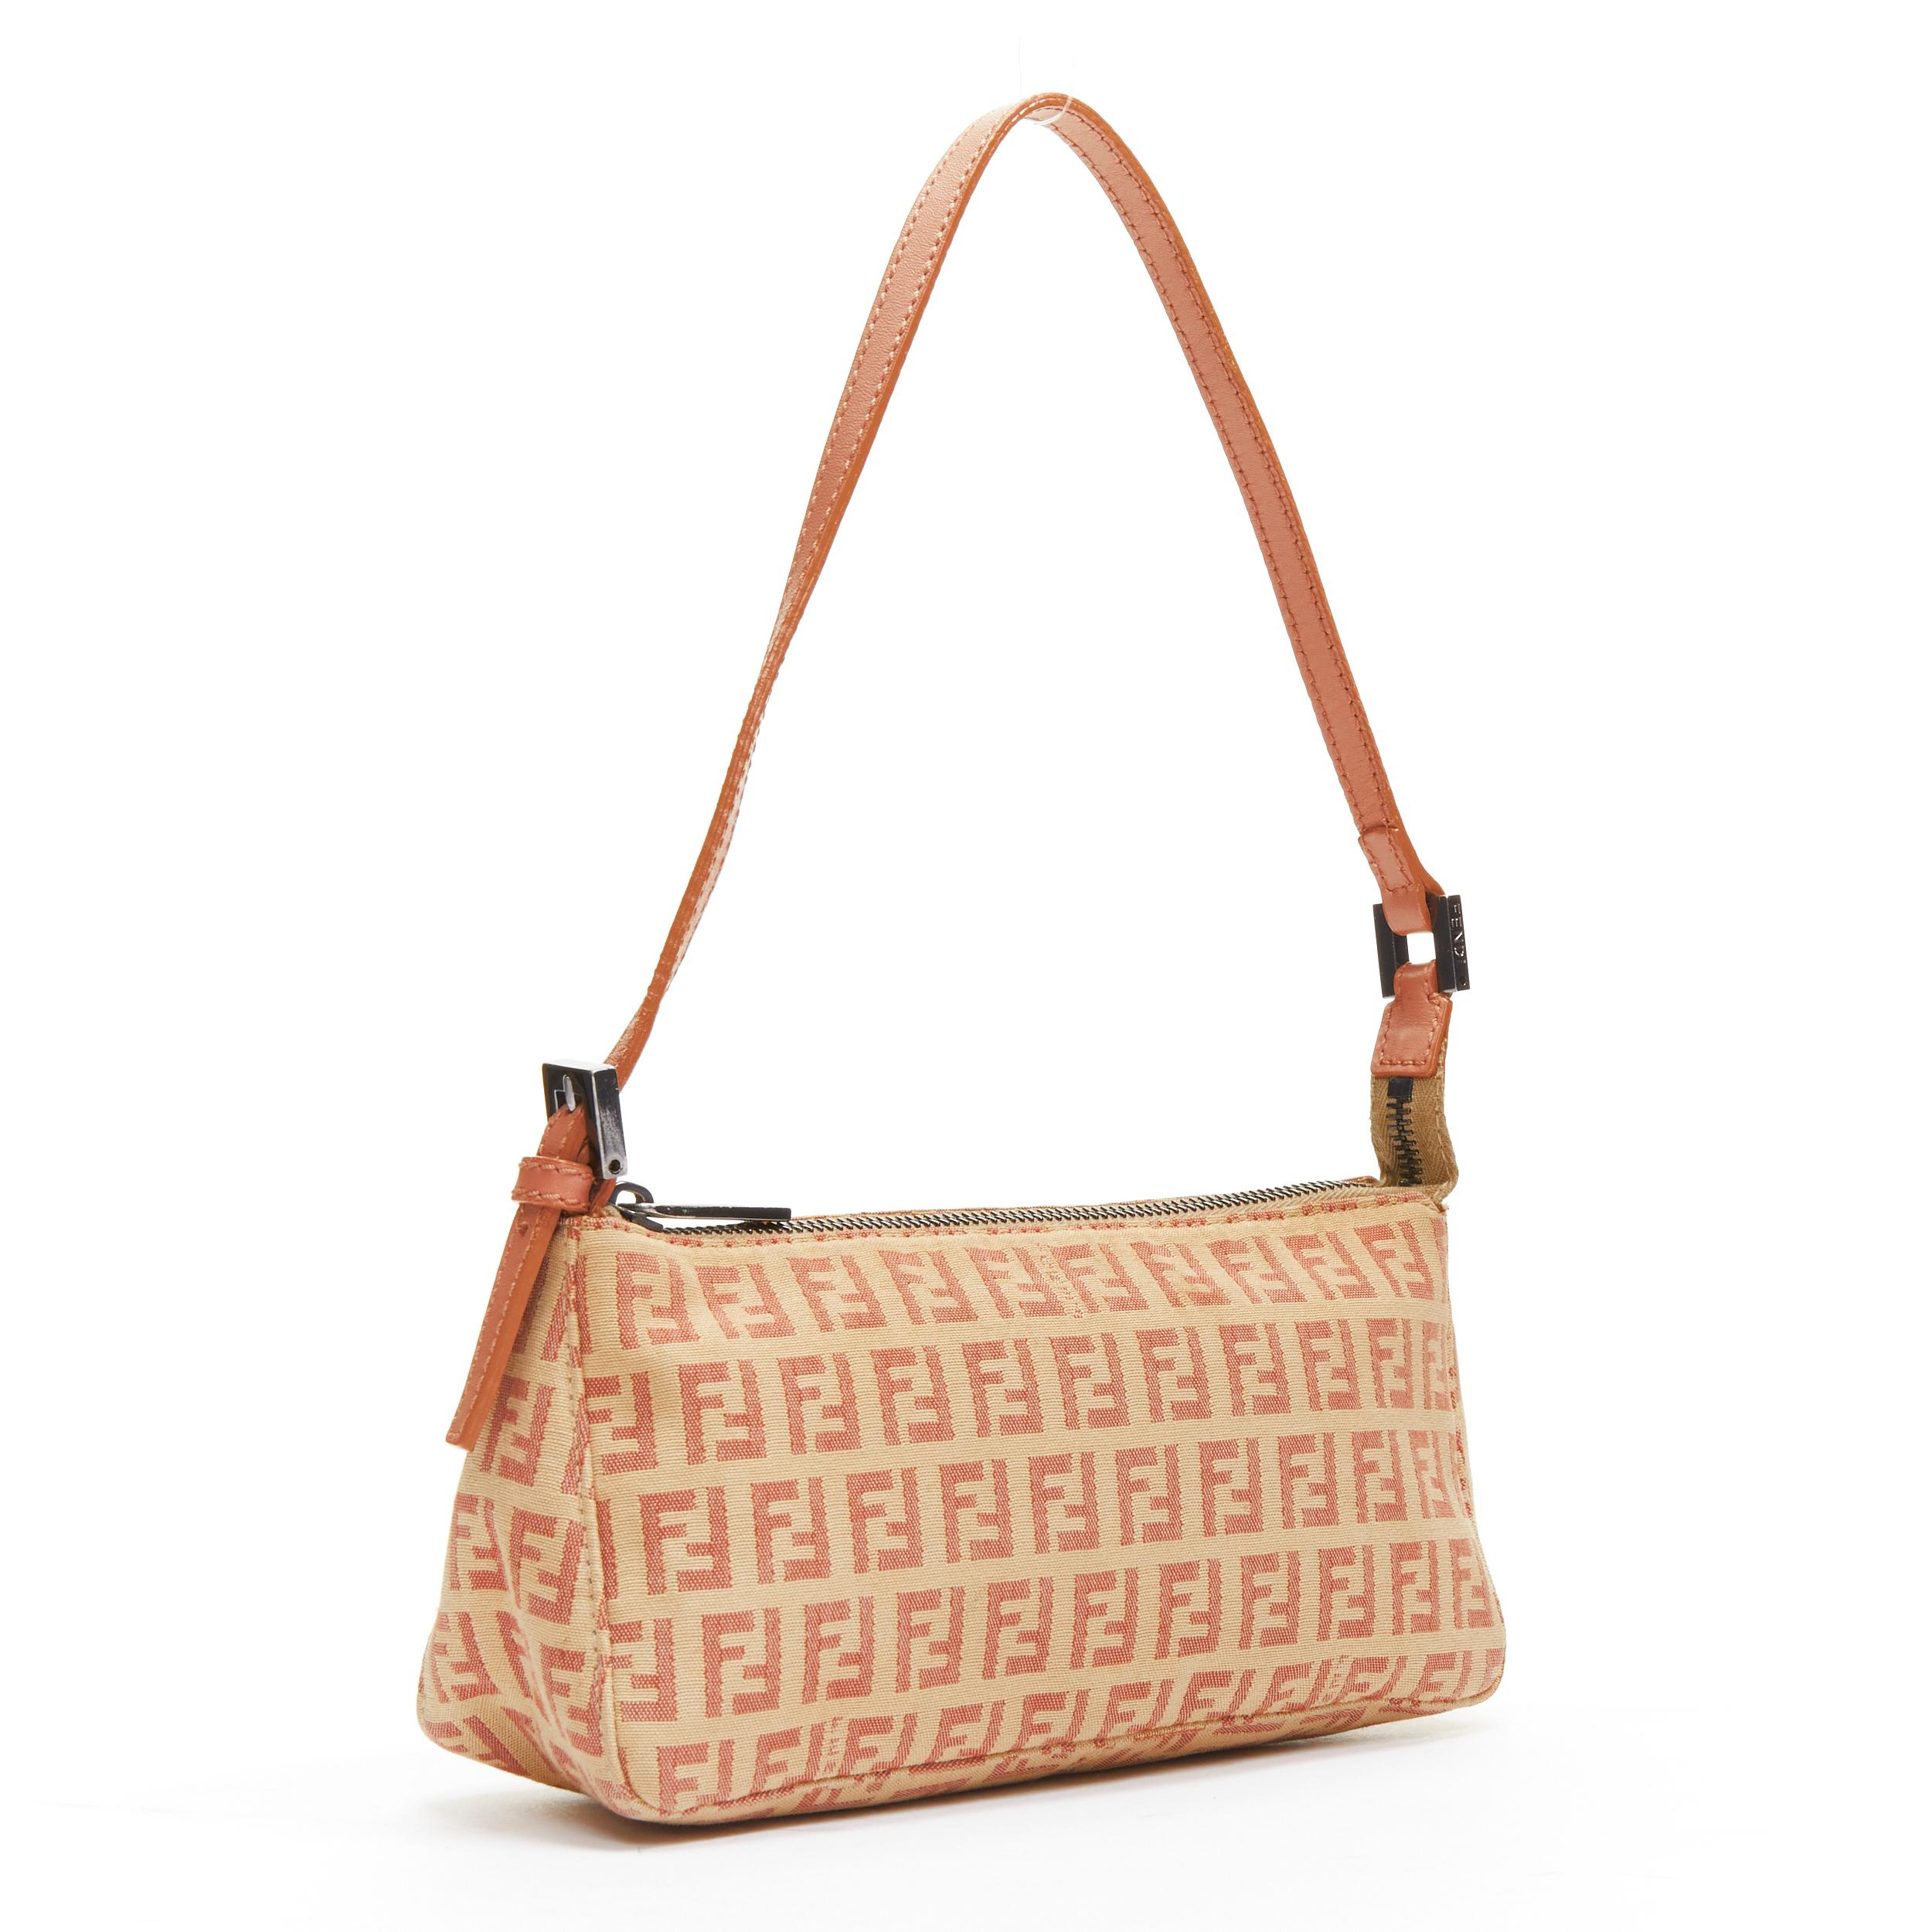 FENDI beige Zucca FF monogram canvas small shoulder underarm bag
Reference: TGAS/D00115
Brand: Fendi
Material: Fabric, Leather
Color: Beige, Khaki
Pattern: Monogram
Lining: Beige Fabric
Extra Details: Adjustable leather strap.
Made in: